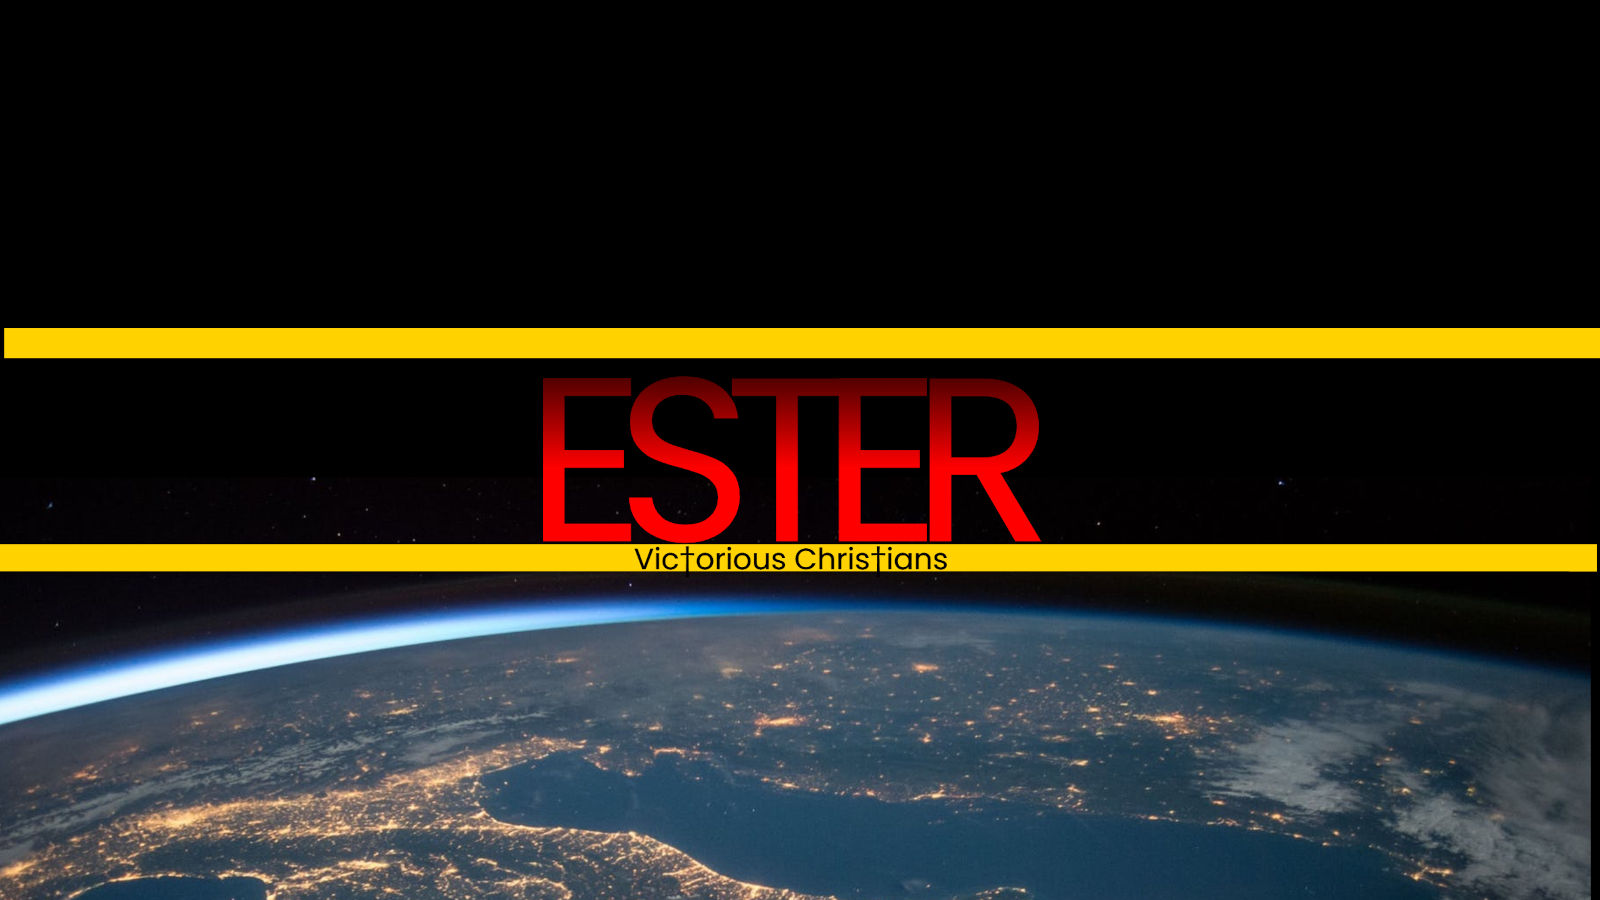 Book of Esther